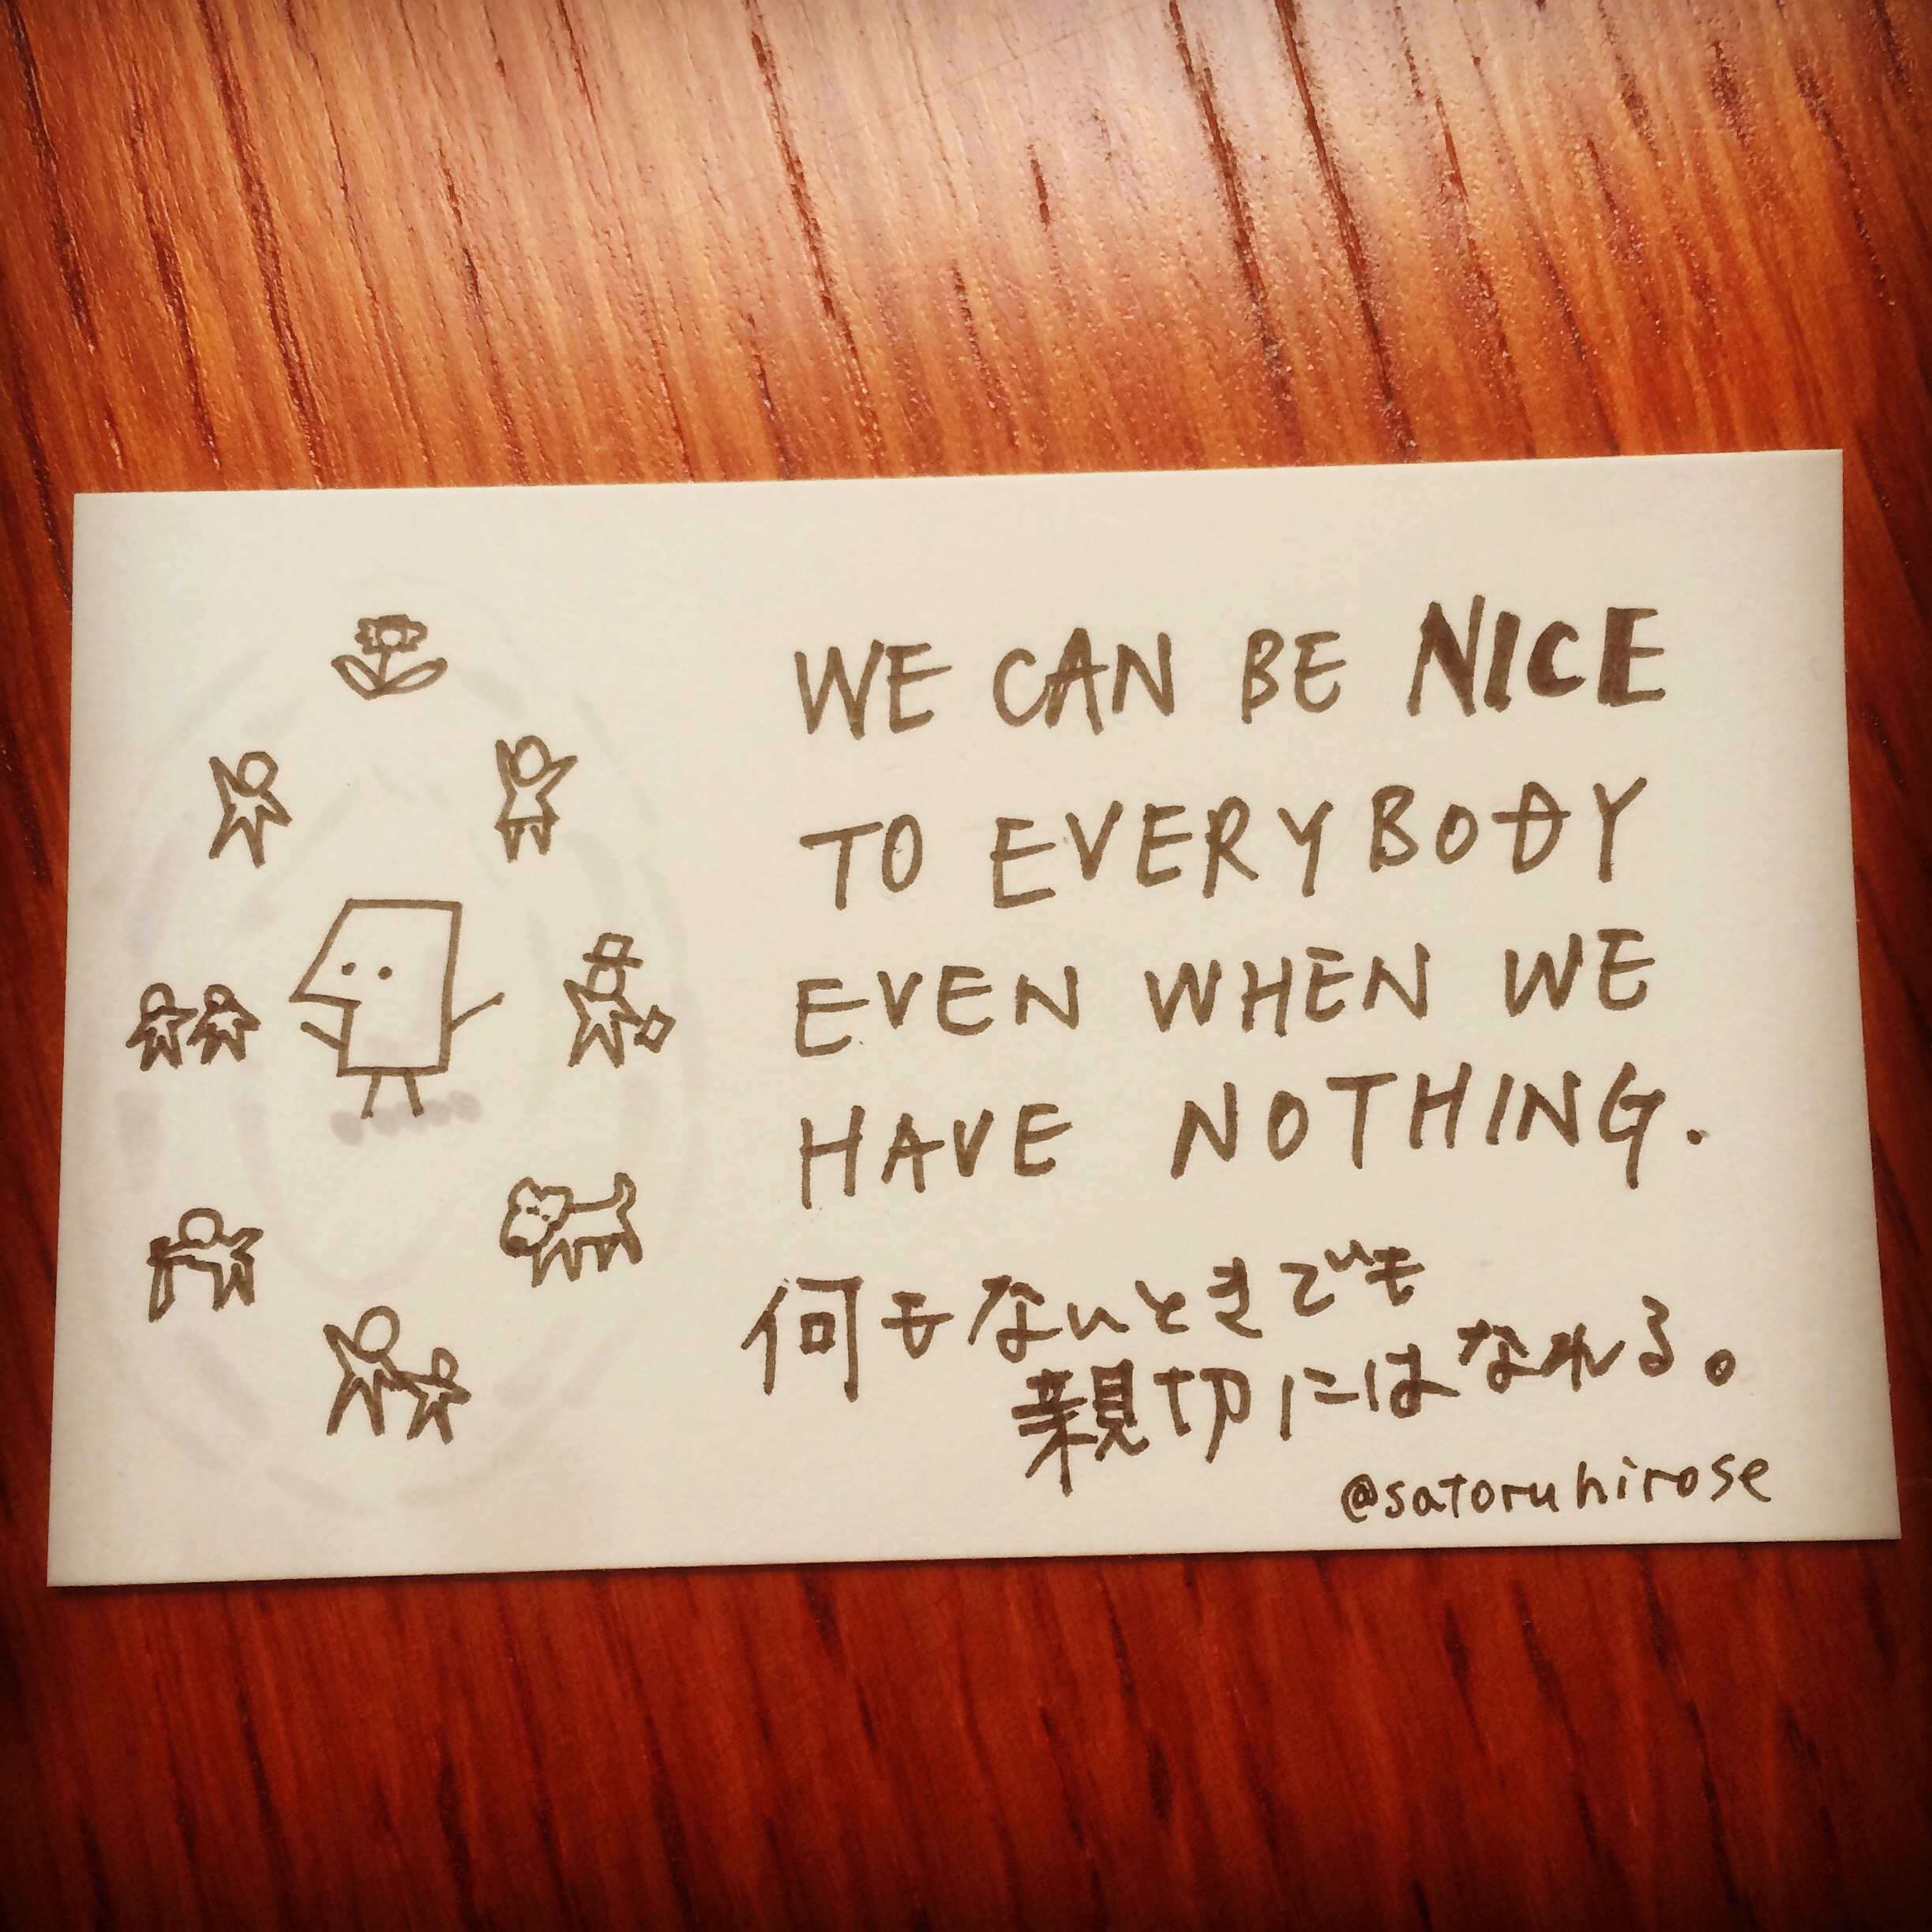 We can be nice to everybody even when we have nothing.